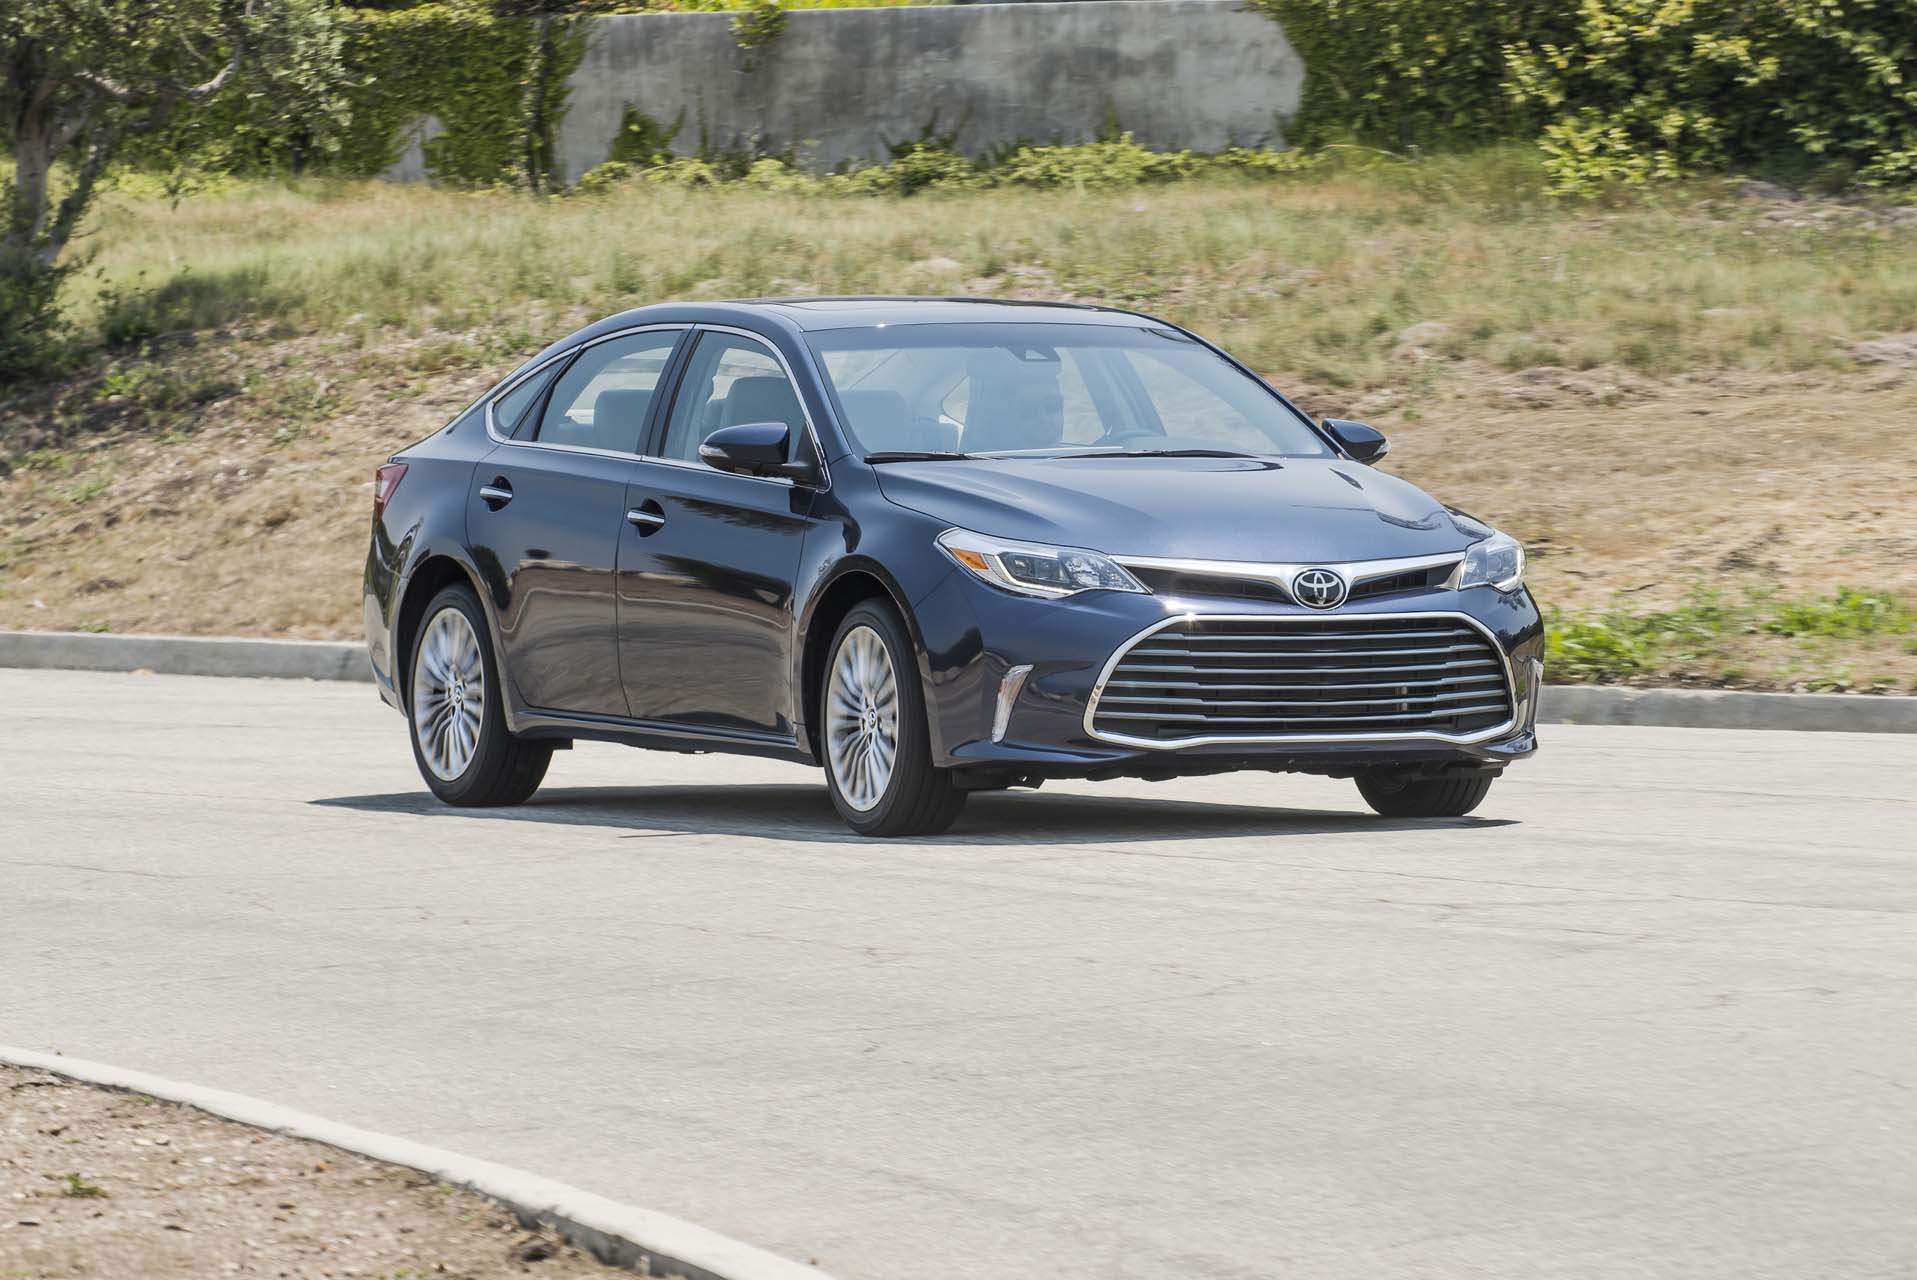 2018 Toyota Avalon Review, Ratings, Specs, Prices, and Photos